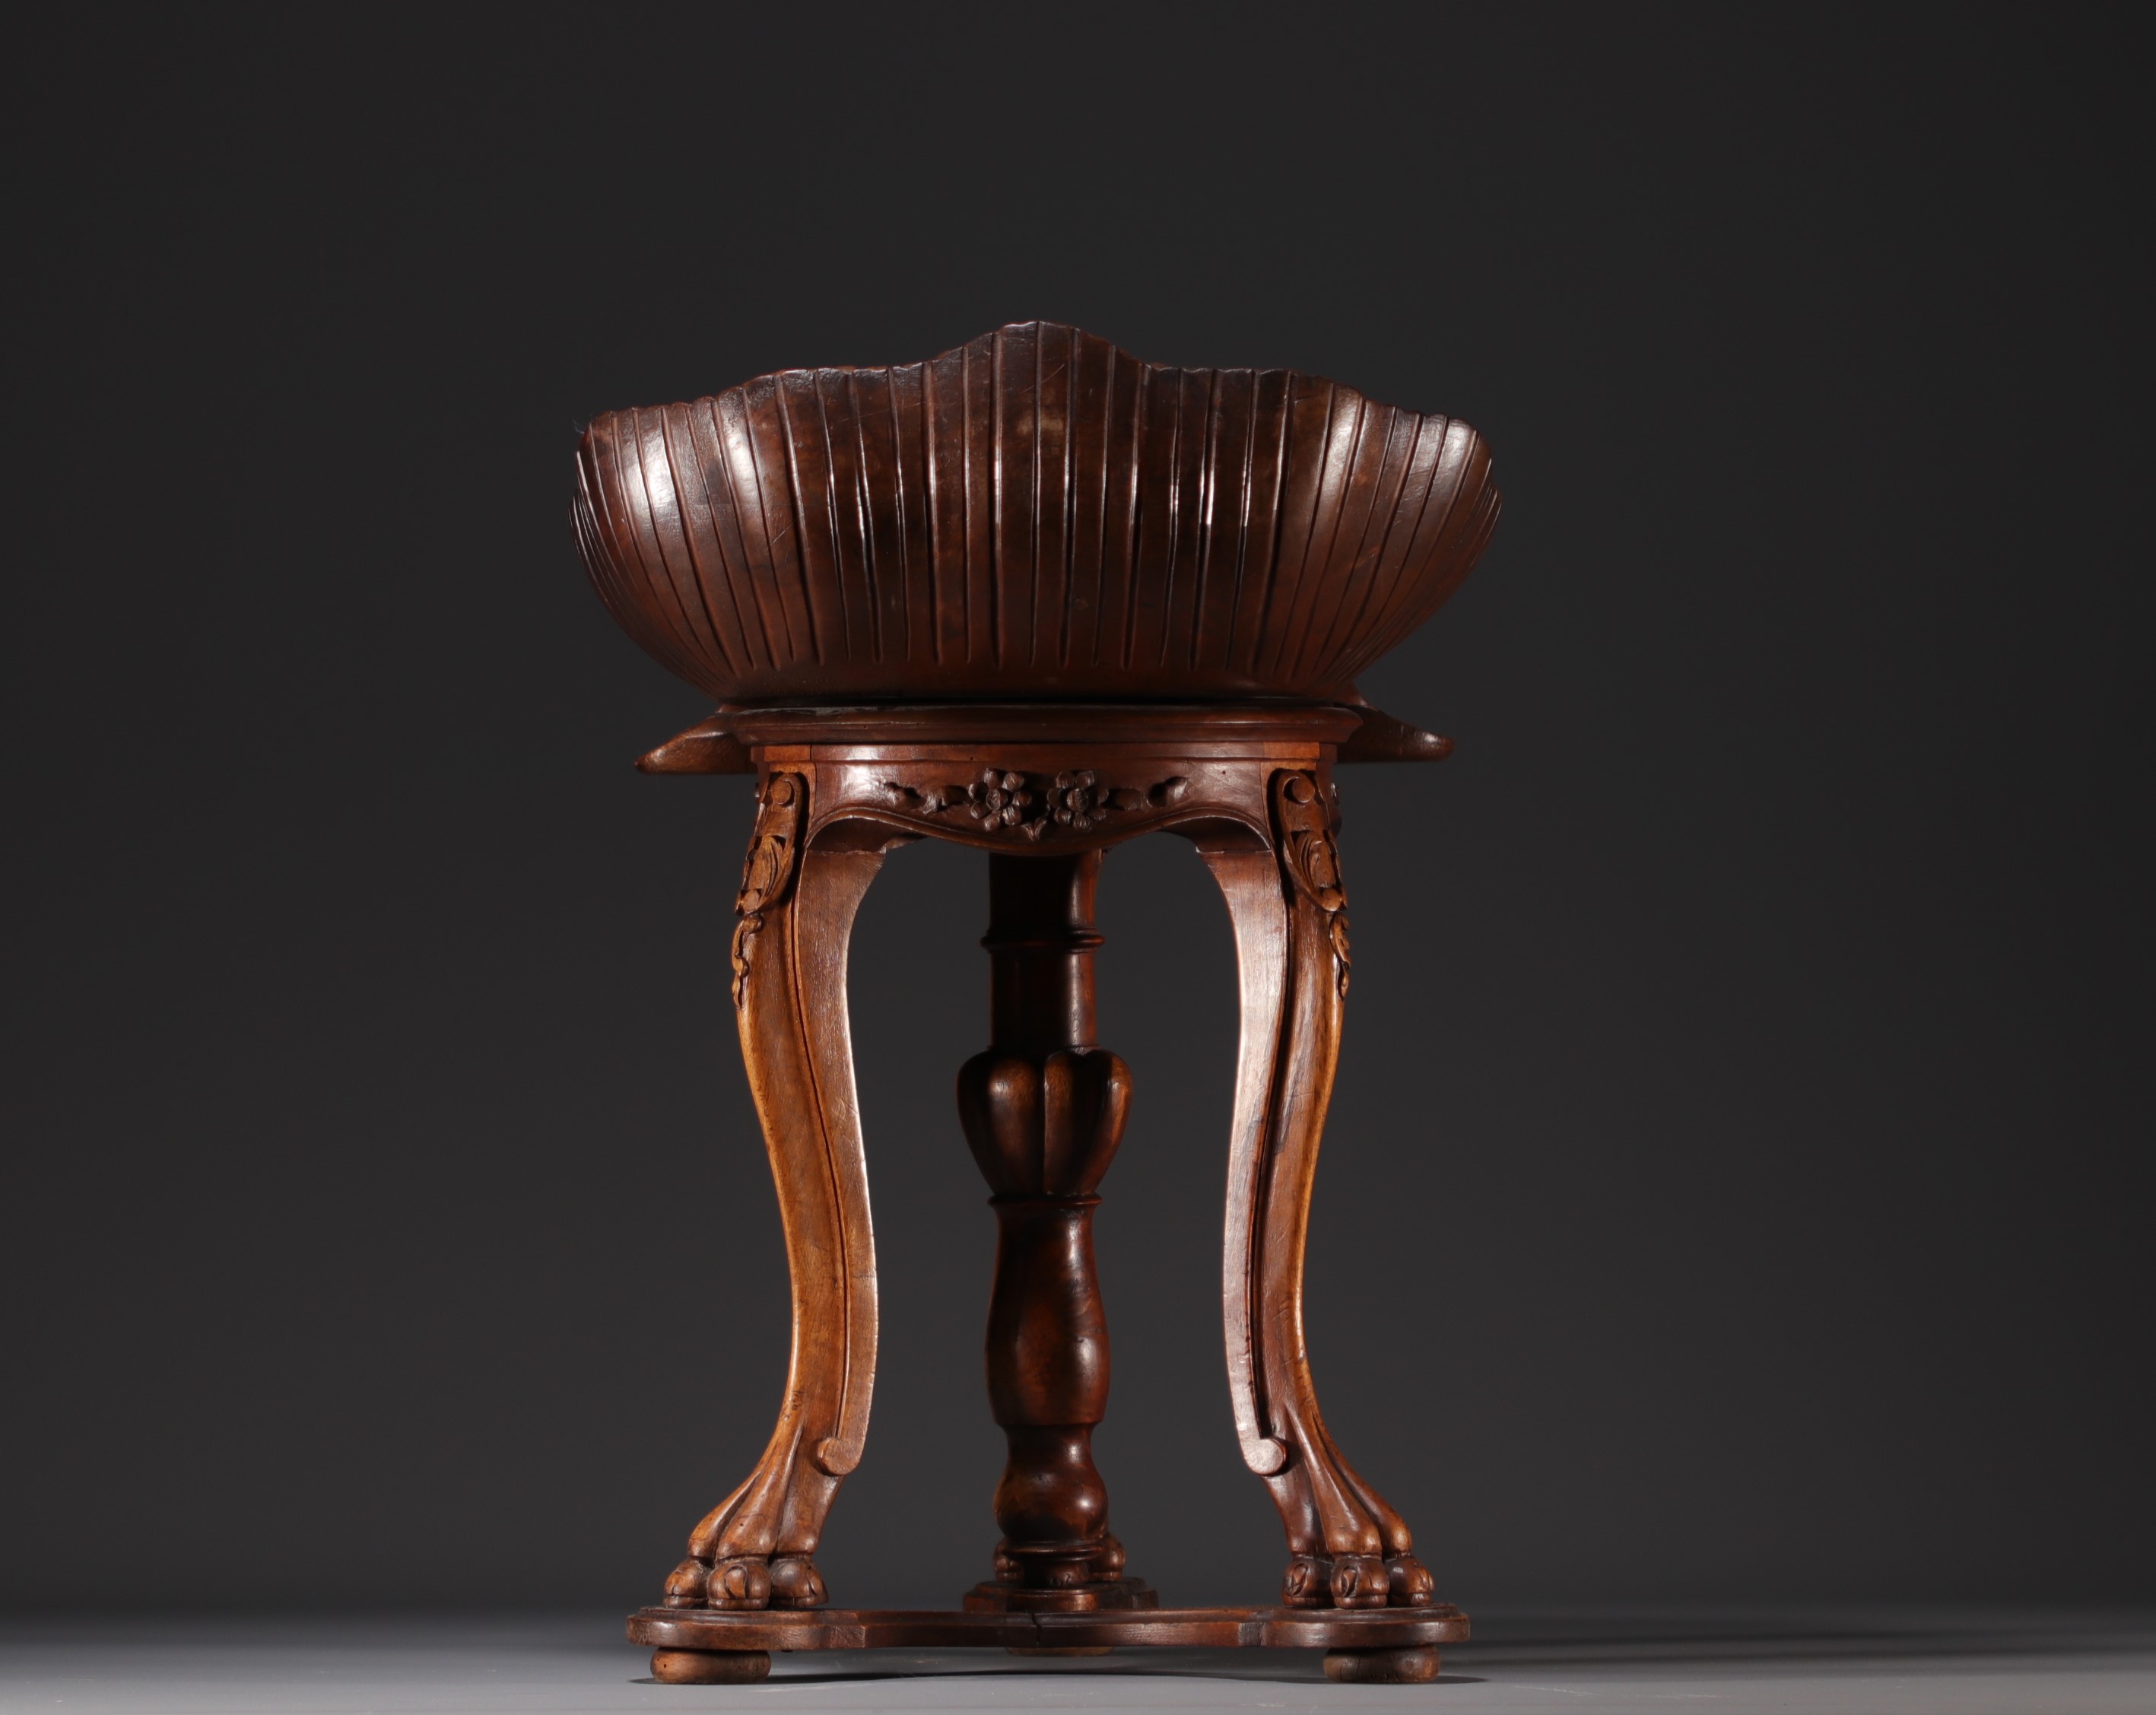 Venetian "Grotto" pianist's or harpist's chair in carved walnut representing a shell on a tripod bas - Image 3 of 3